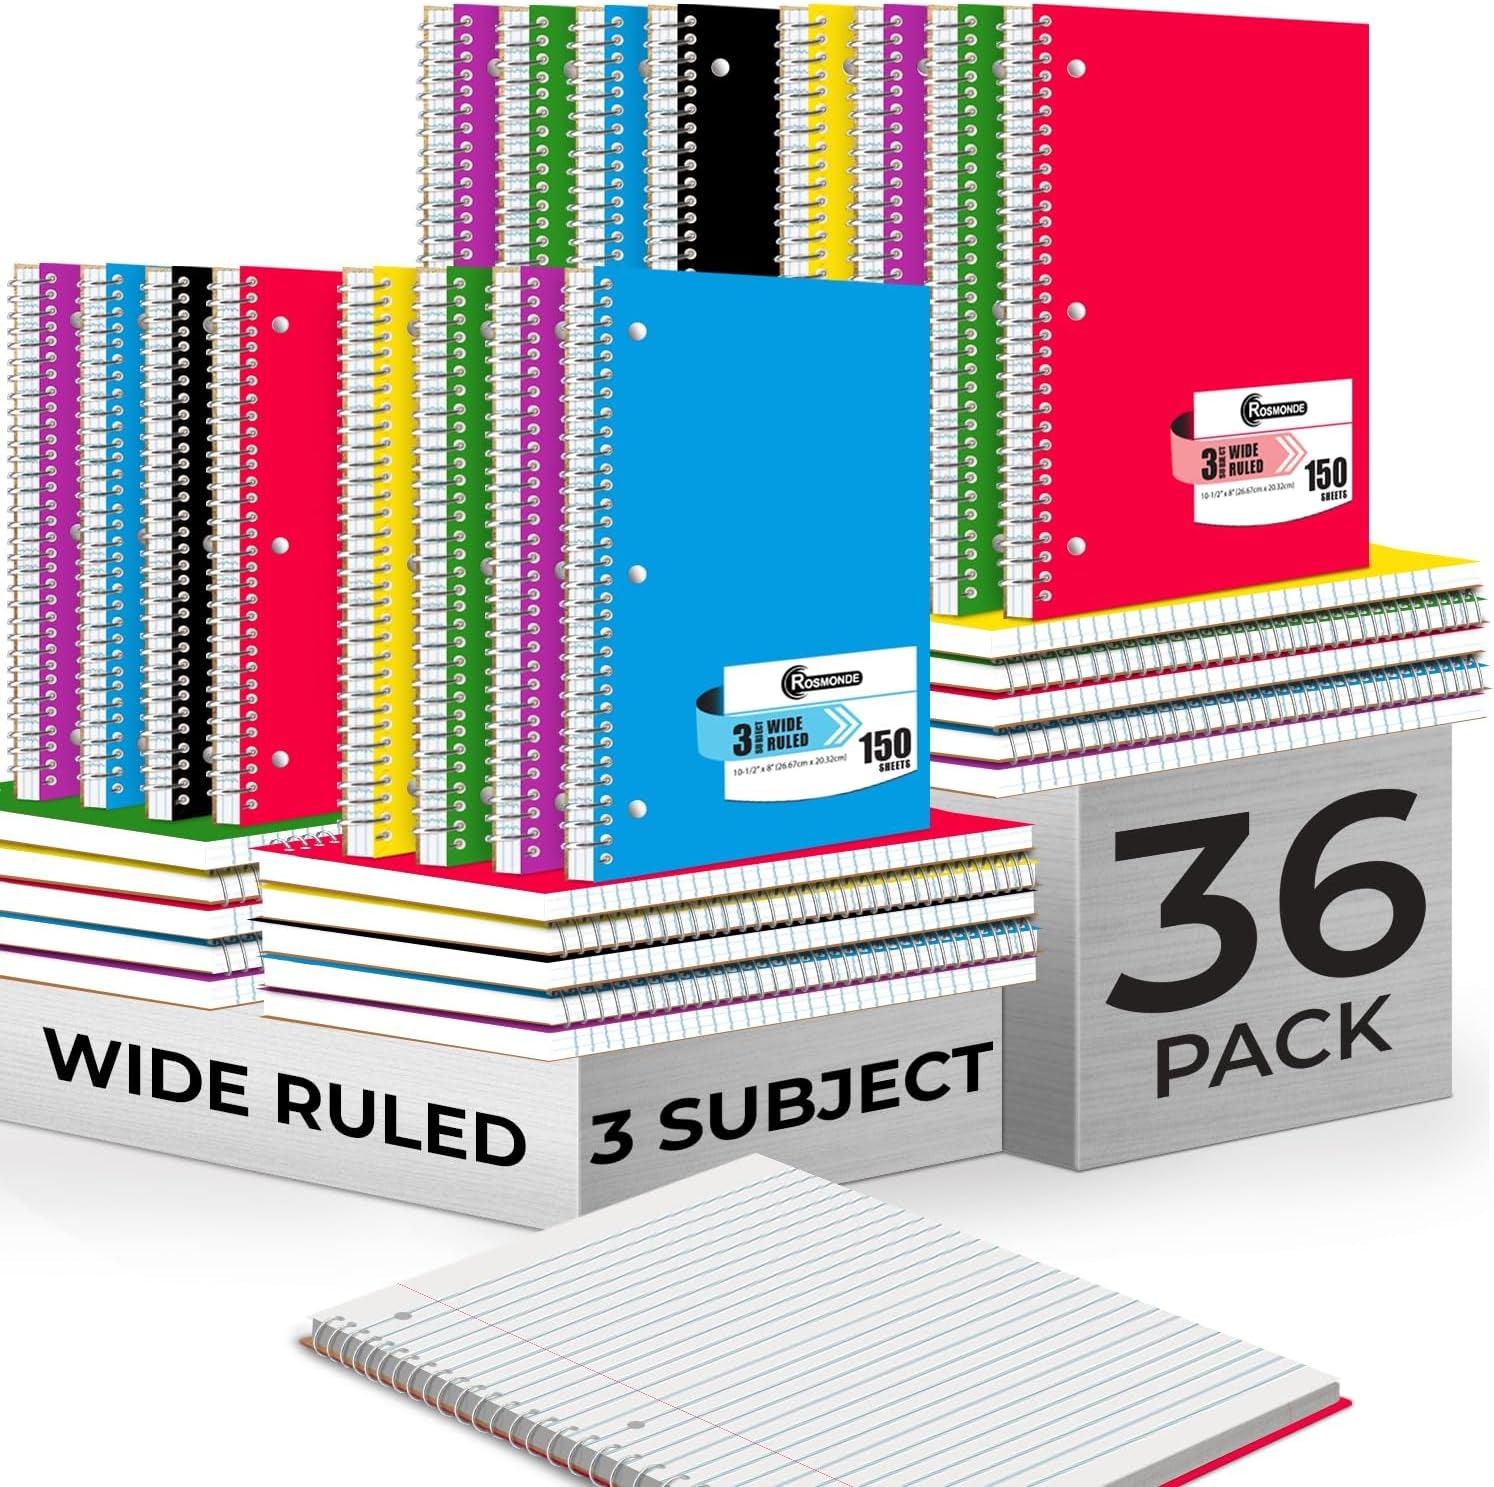 Spiral Notebooks, 12 Pack, 1 Subject Notebook, Wide Ruled, 70 Sheets, 8 X 10-1/2", 3 Hole Punched, School Supplies, Bulk Single Subject Spiral Notebook Bulk, Assorted Colors Pack of Notebooks